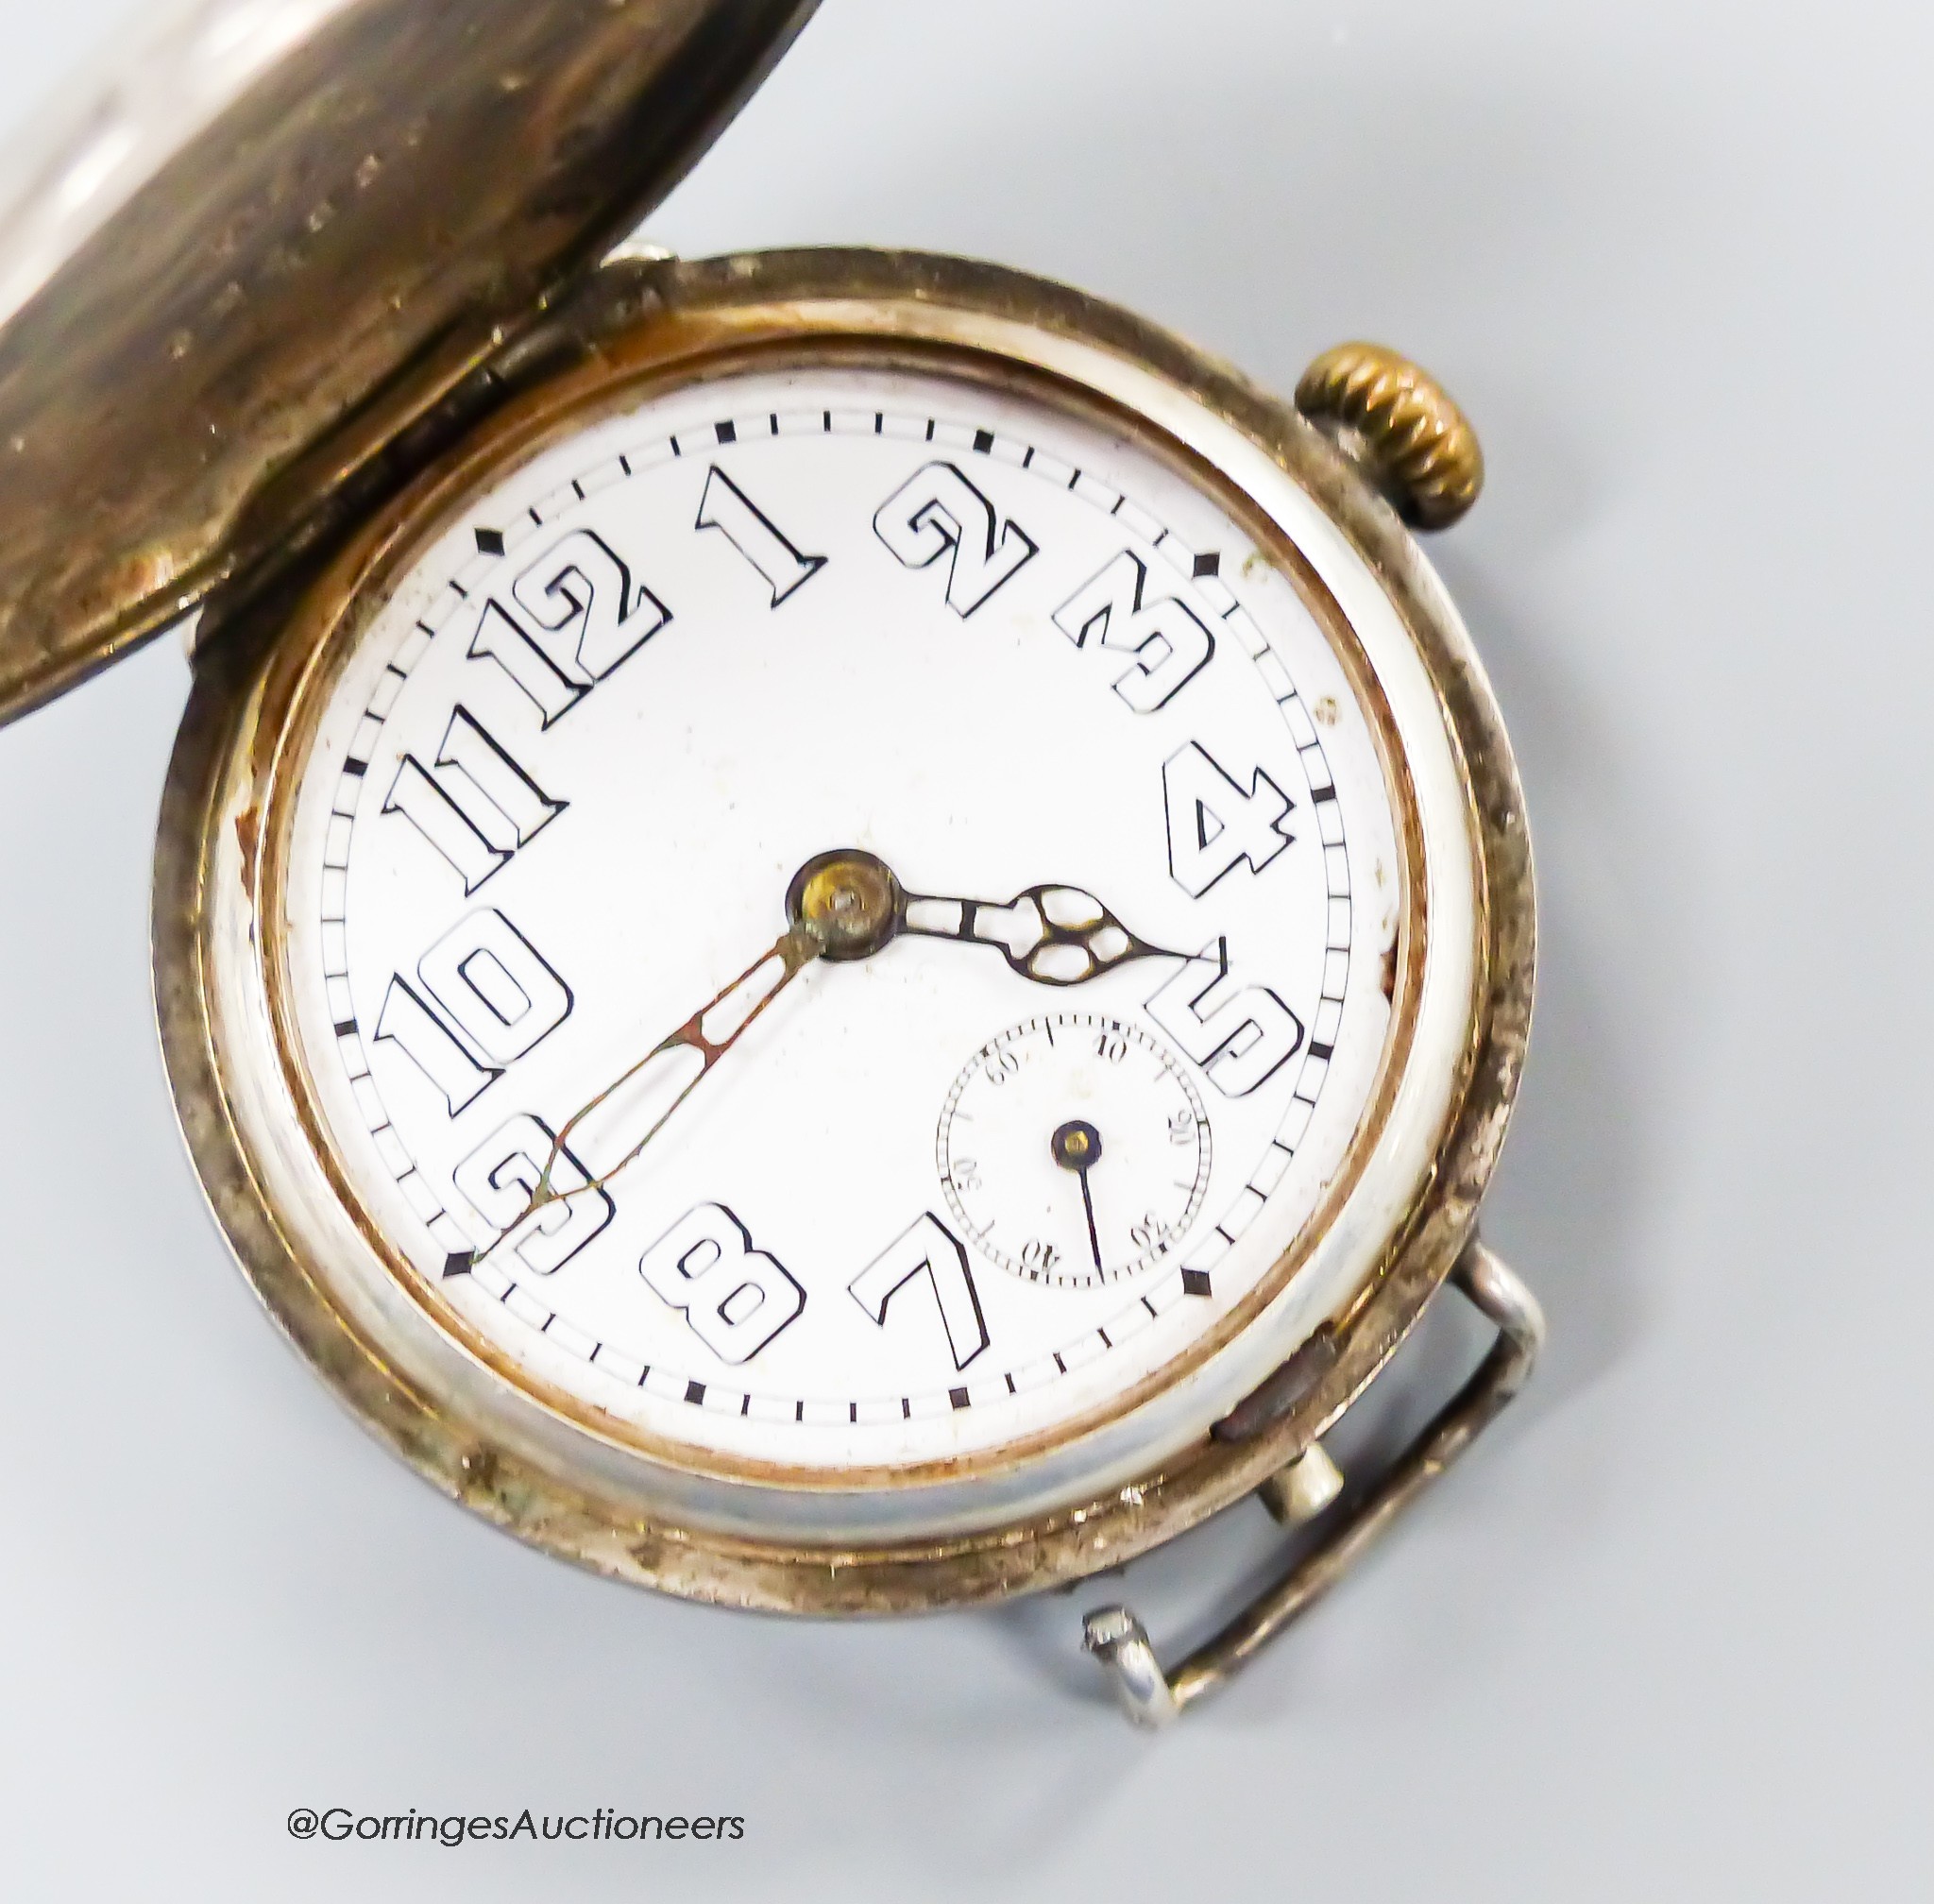 An early 20th century silver Rolex manual wind hunter trench watch with Arabic dial and subsidiary seconds, no strap, part of one lug detached and engraved monogram, case diameter 35mm.